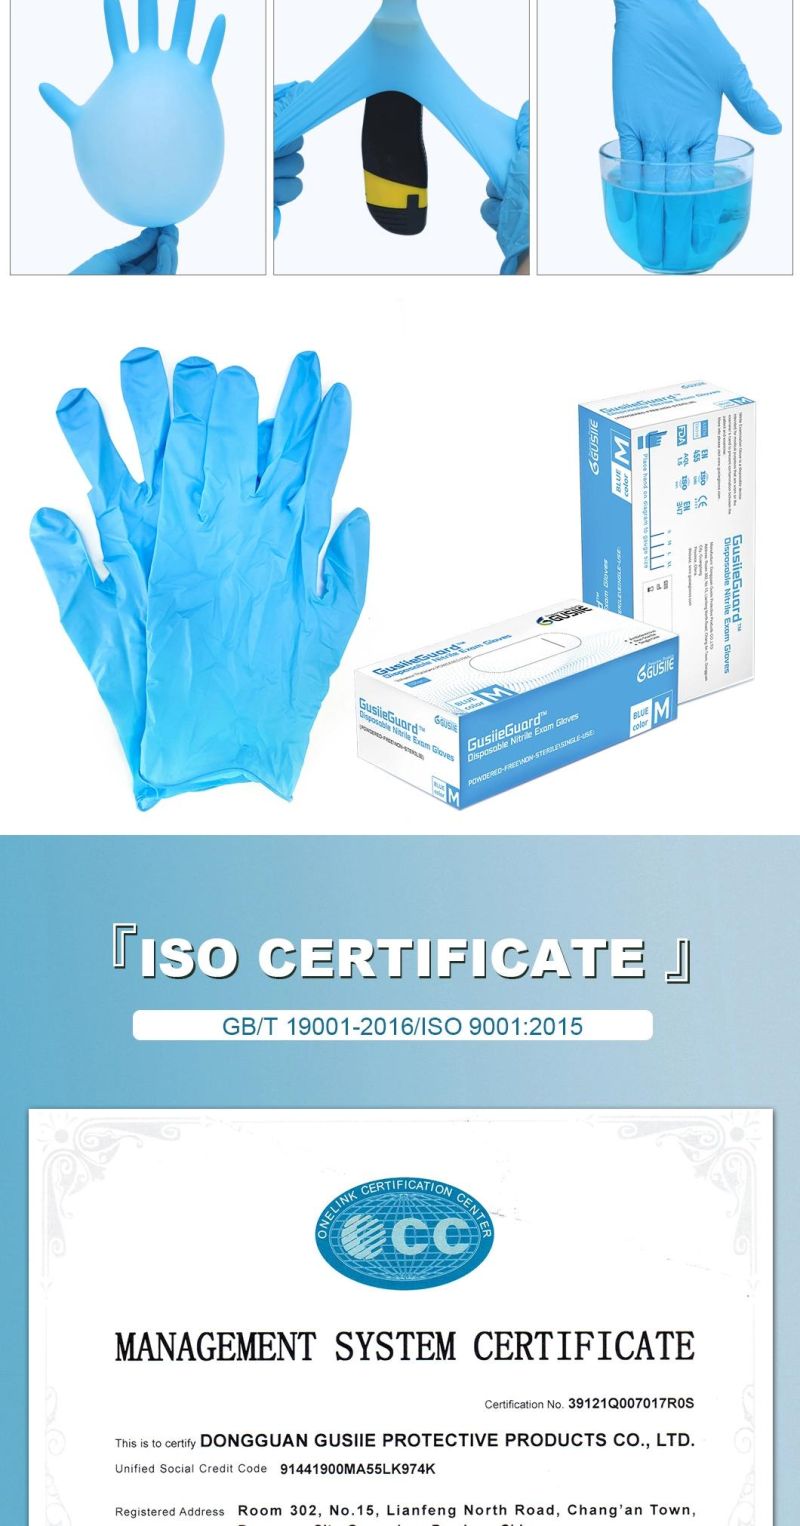 Gusiie Hot Sale Safety Disposable Medical Examination Nitrile Gloves